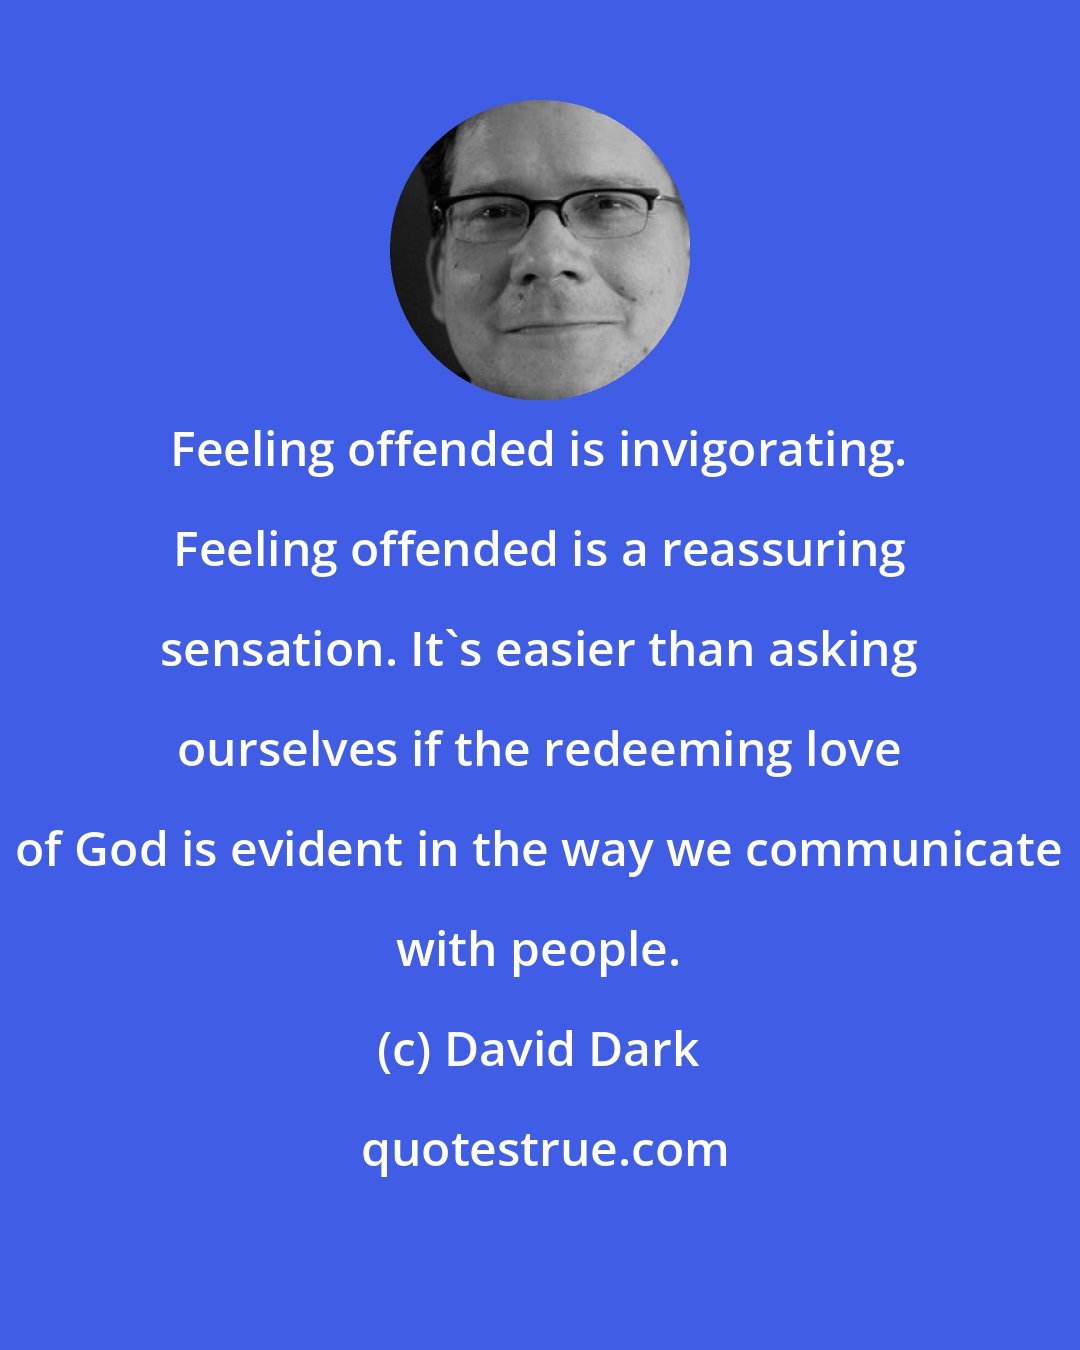 David Dark: Feeling offended is invigorating. Feeling offended is a reassuring sensation. It's easier than asking ourselves if the redeeming love of God is evident in the way we communicate with people.